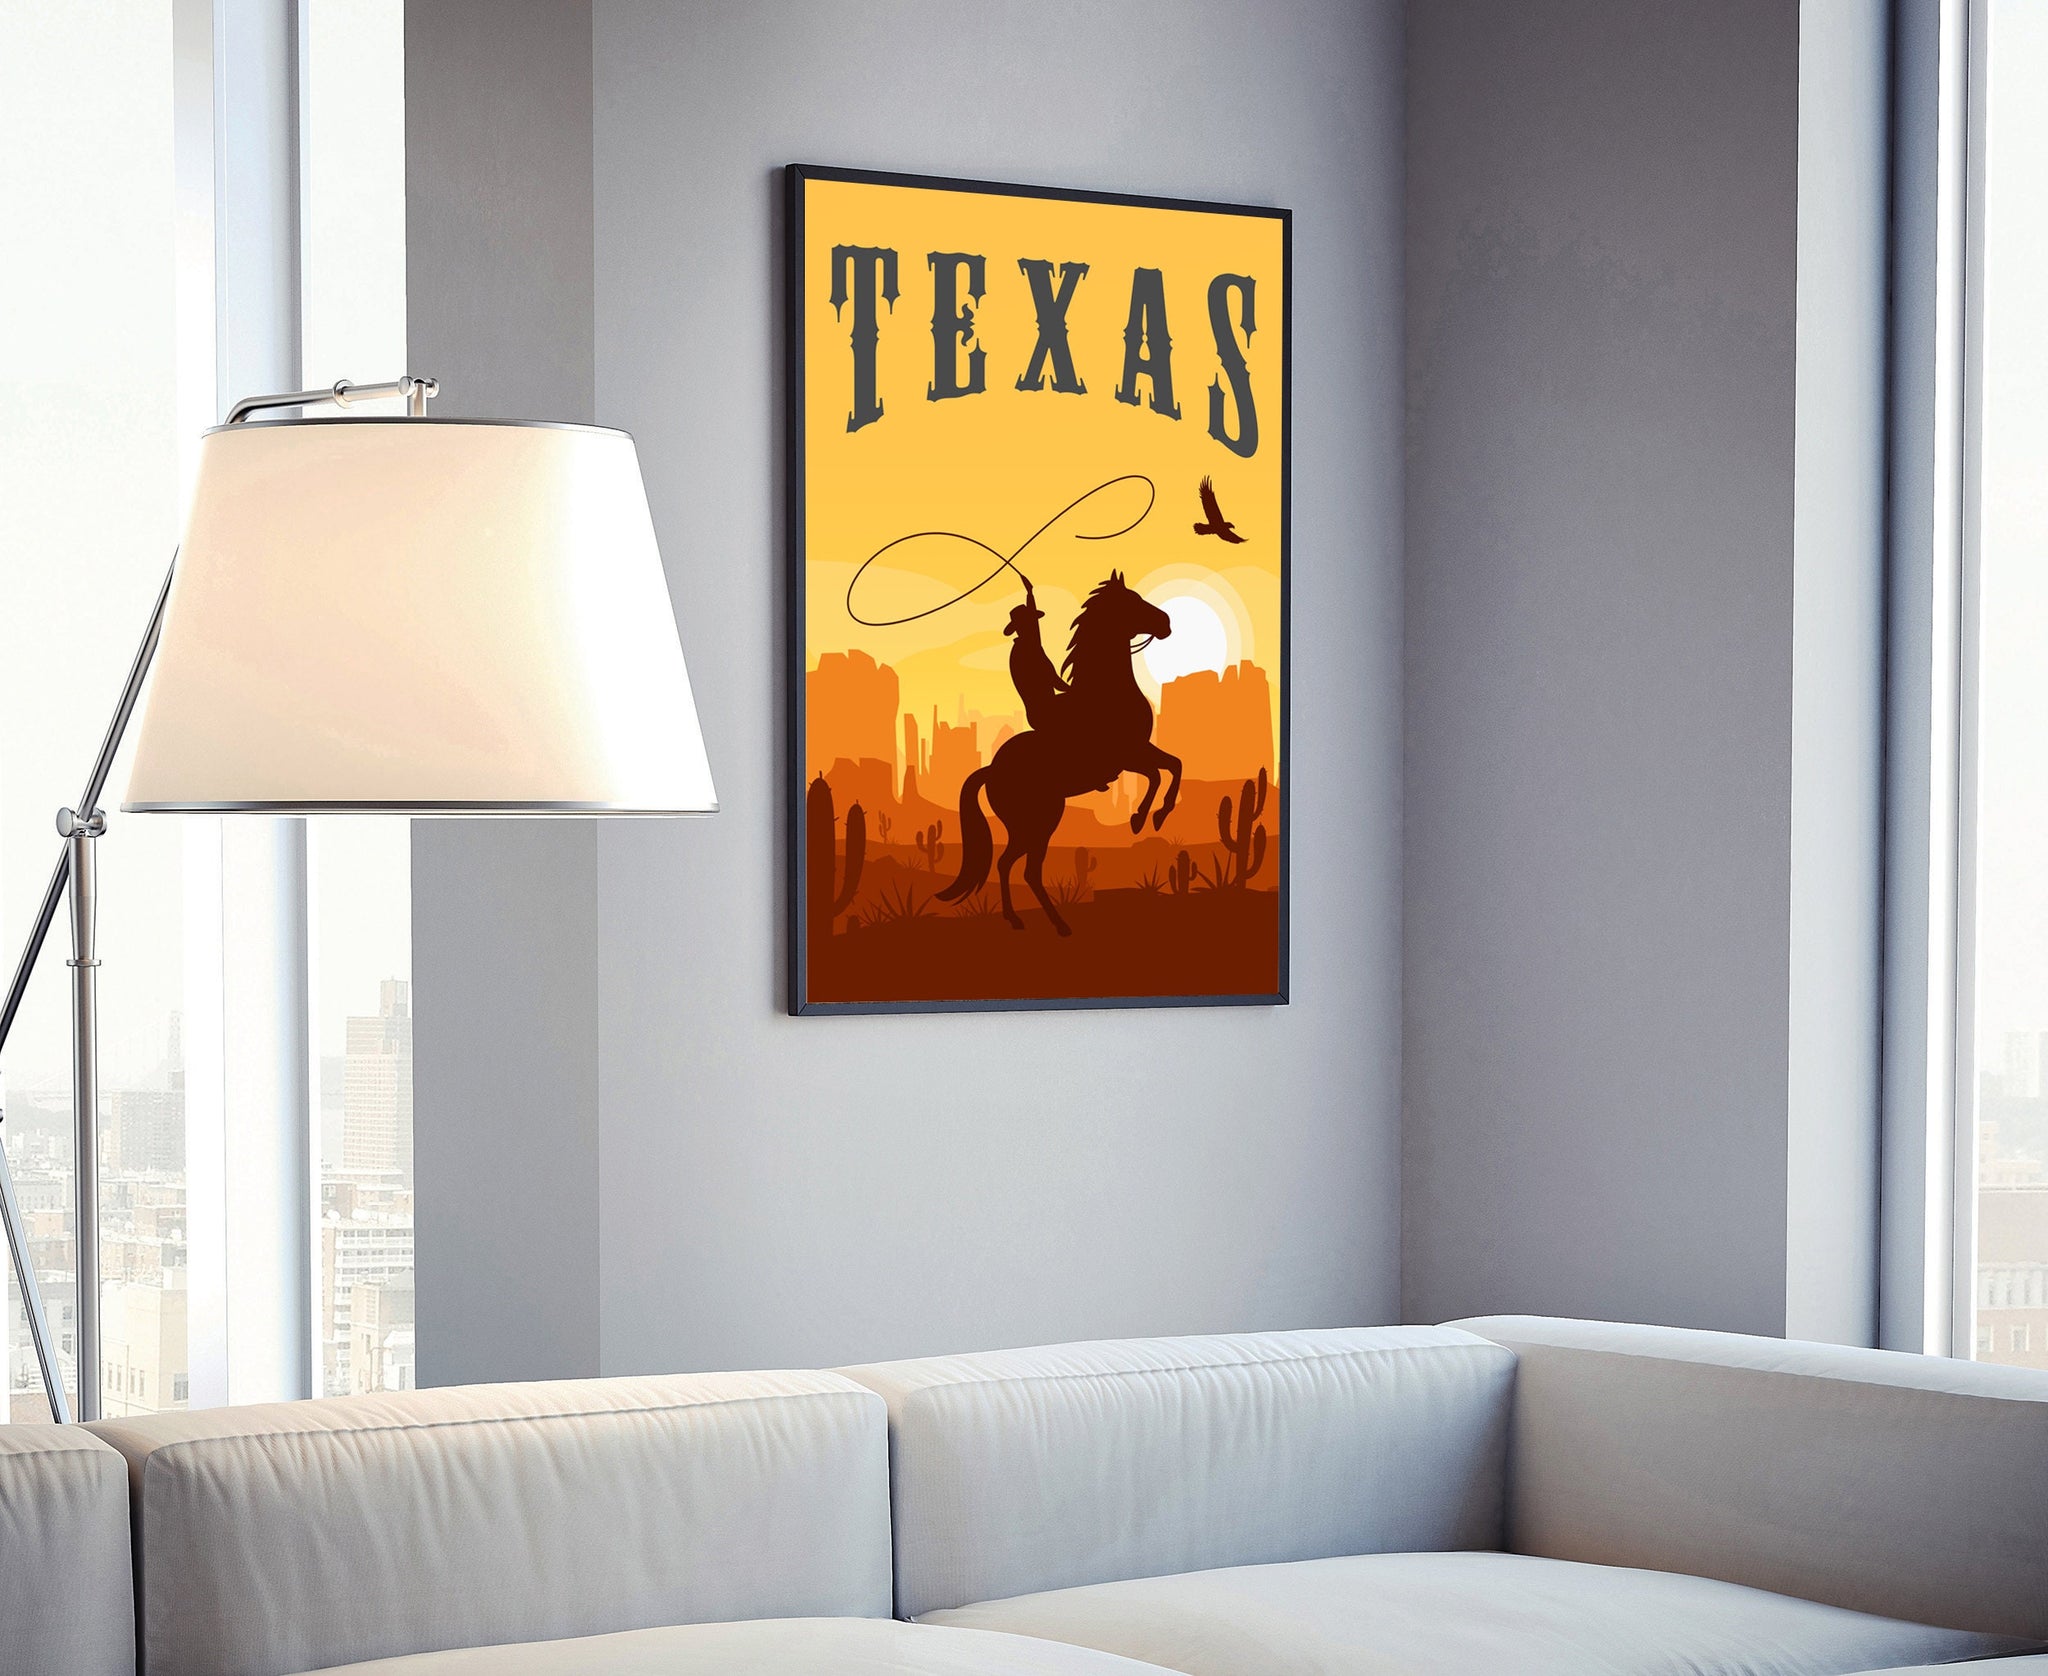 Texas Vintage Rustic Poster Print, Retro Style Travel Poster